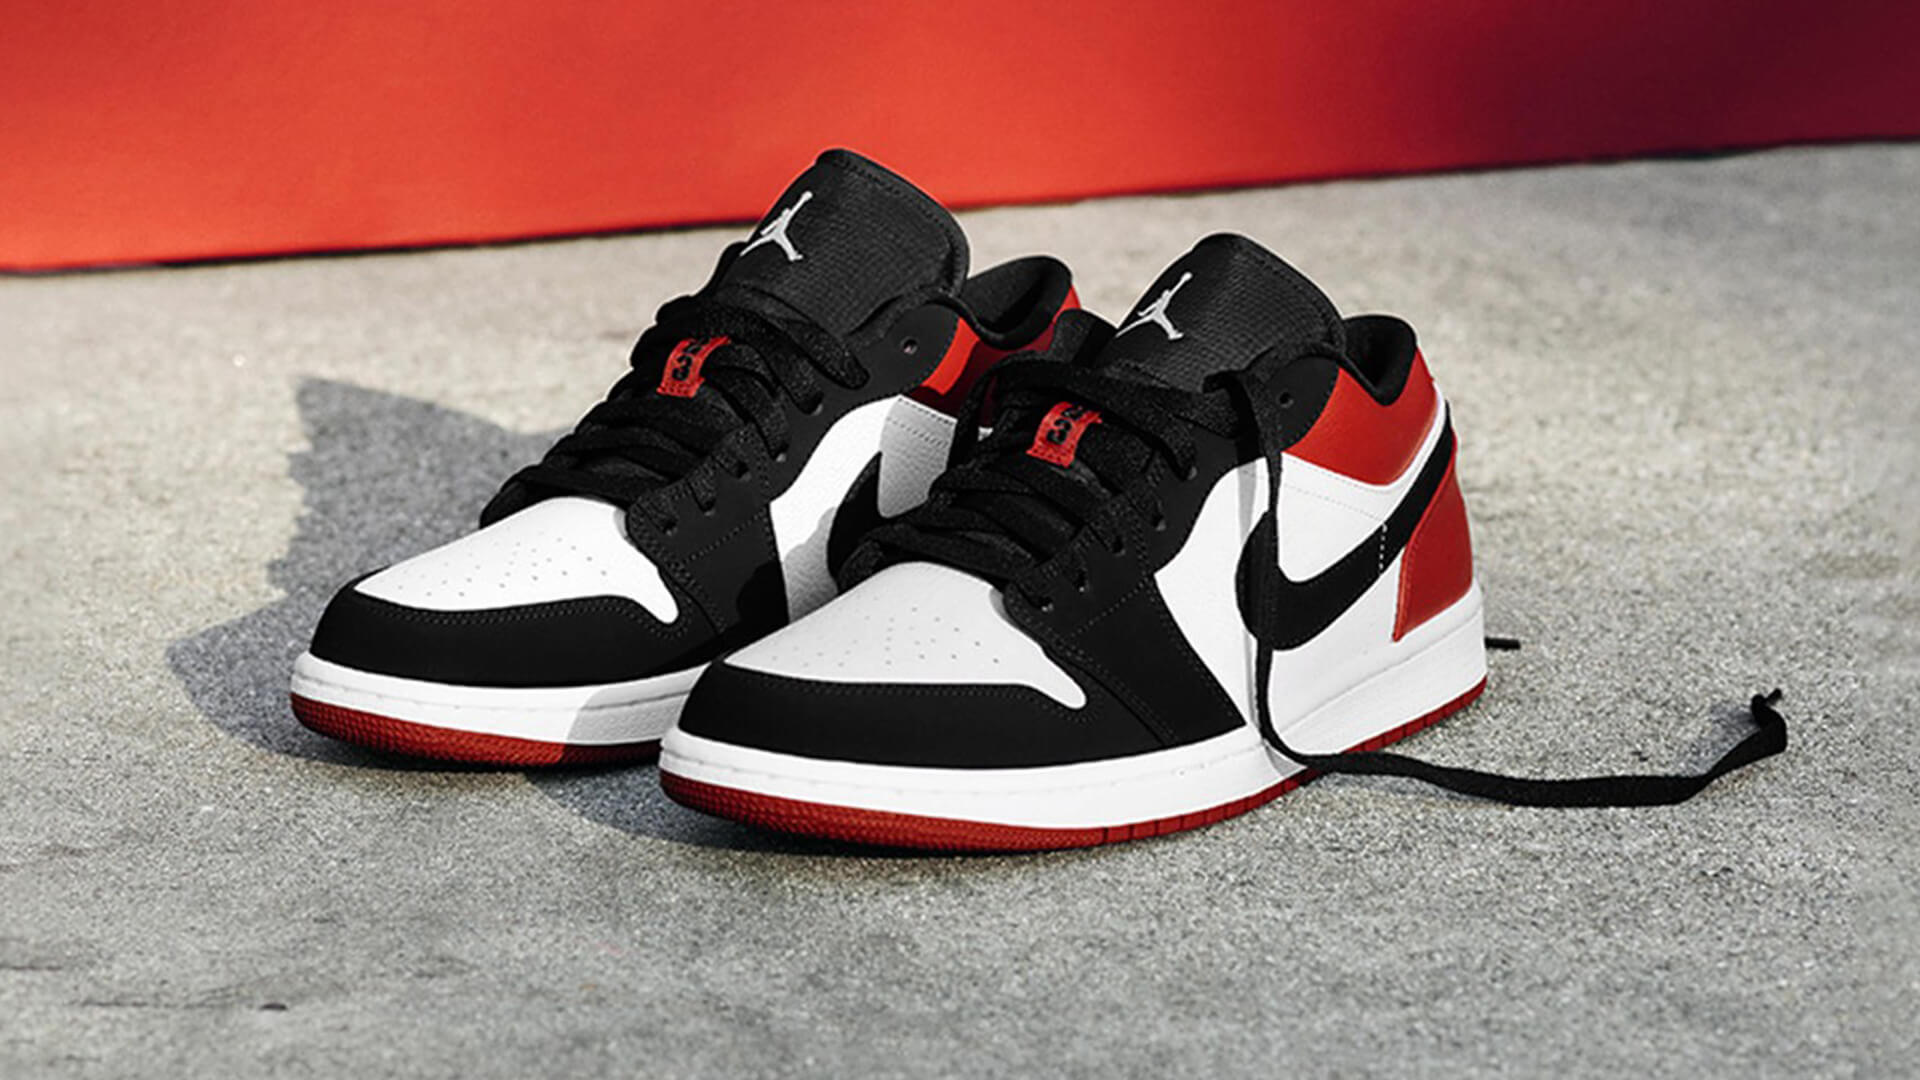 Latest Nike Air Jordan 1 Low Trainer Releases & Next Drops | The Sole